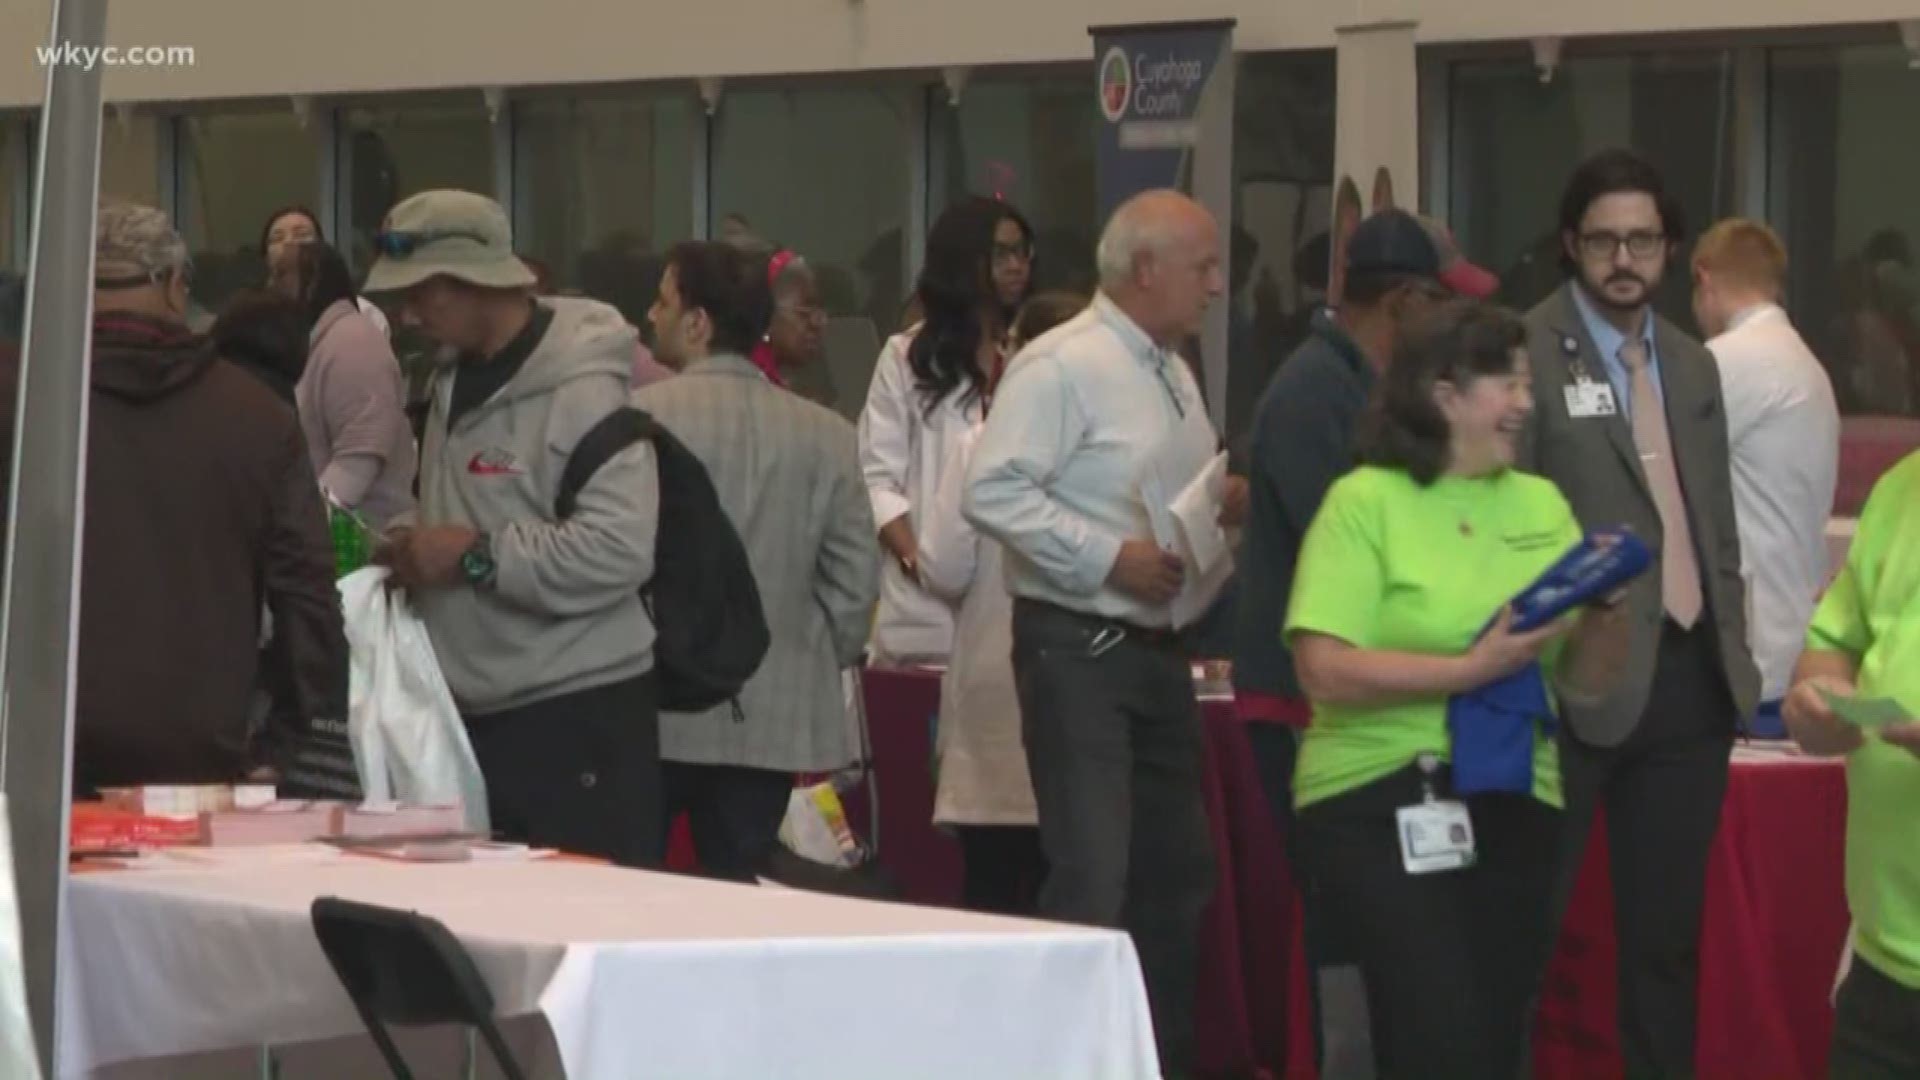 17th annual minority men's health fair at 4 different locations